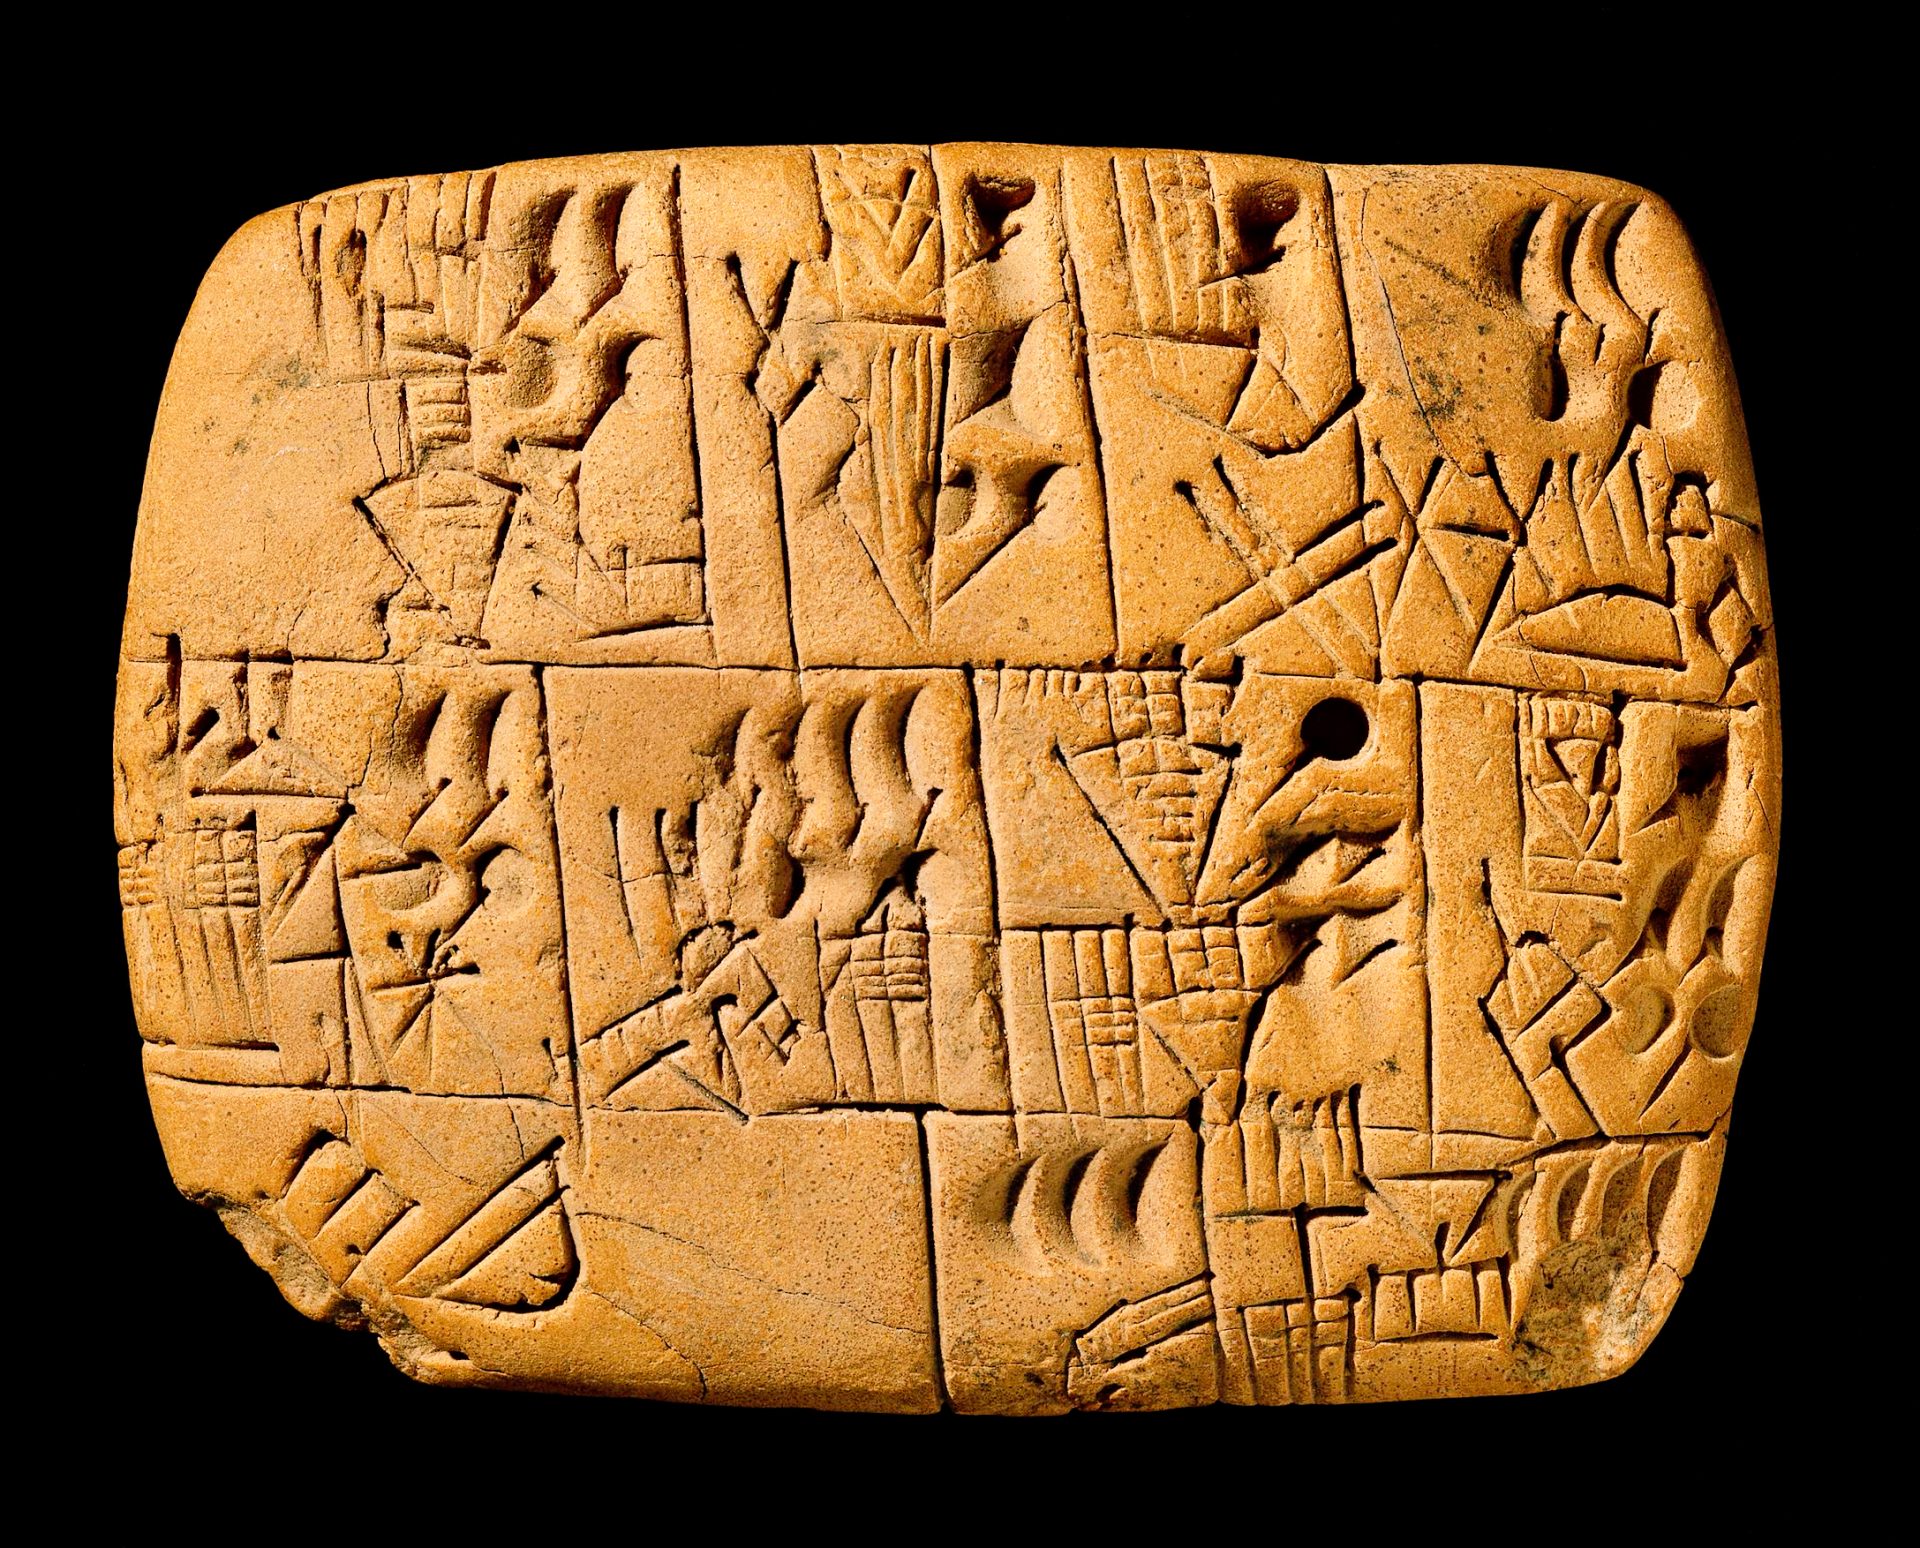 An ancient clay tablet with cuneiform writing on a black background. The tablet is rectangular in shape. The cuneiform writing is in a variety of sizes and styles, and covers the entire surface of the tablet. The tablet is light brown and has minor chips and cracks.